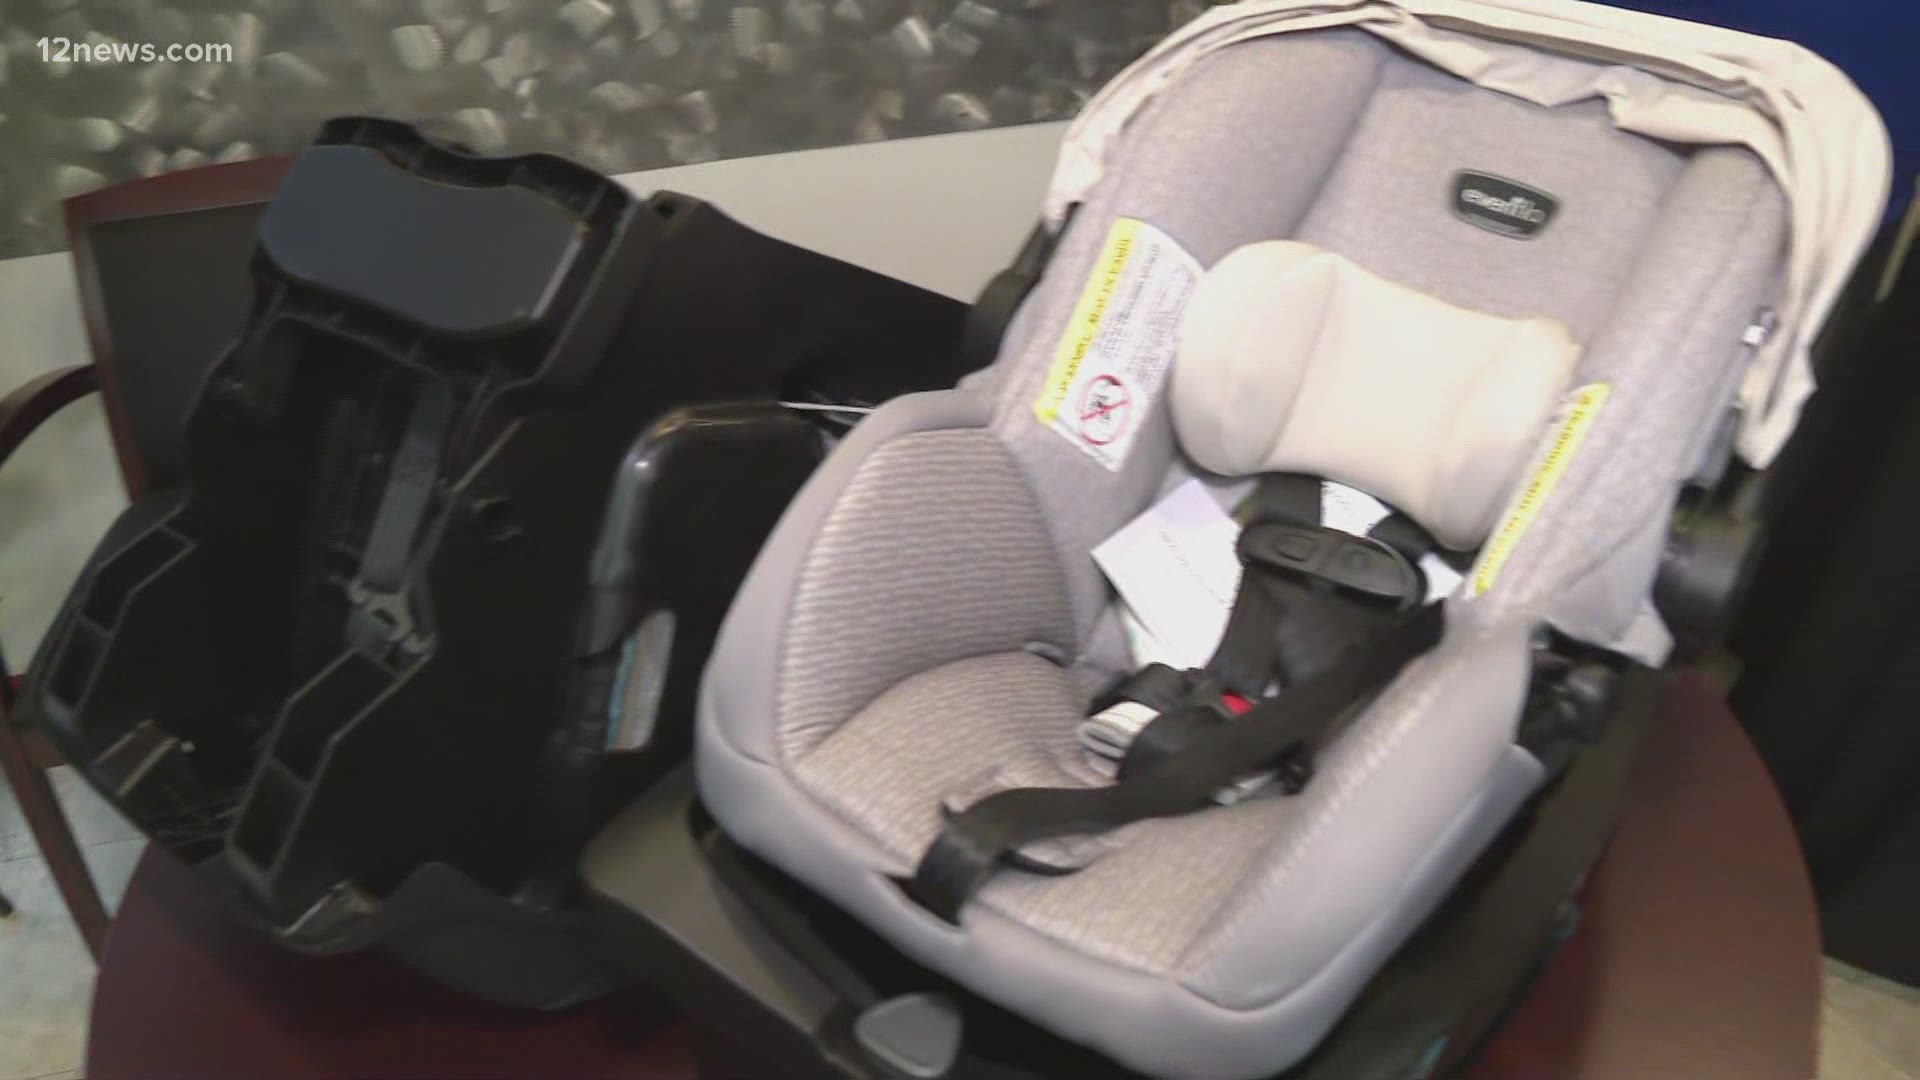 You can recycle an old or damaged child car seat at a participating Network of Neighborhood Auto Repair Professionals shop until April 16: NARPRO.com/find-a-shop.